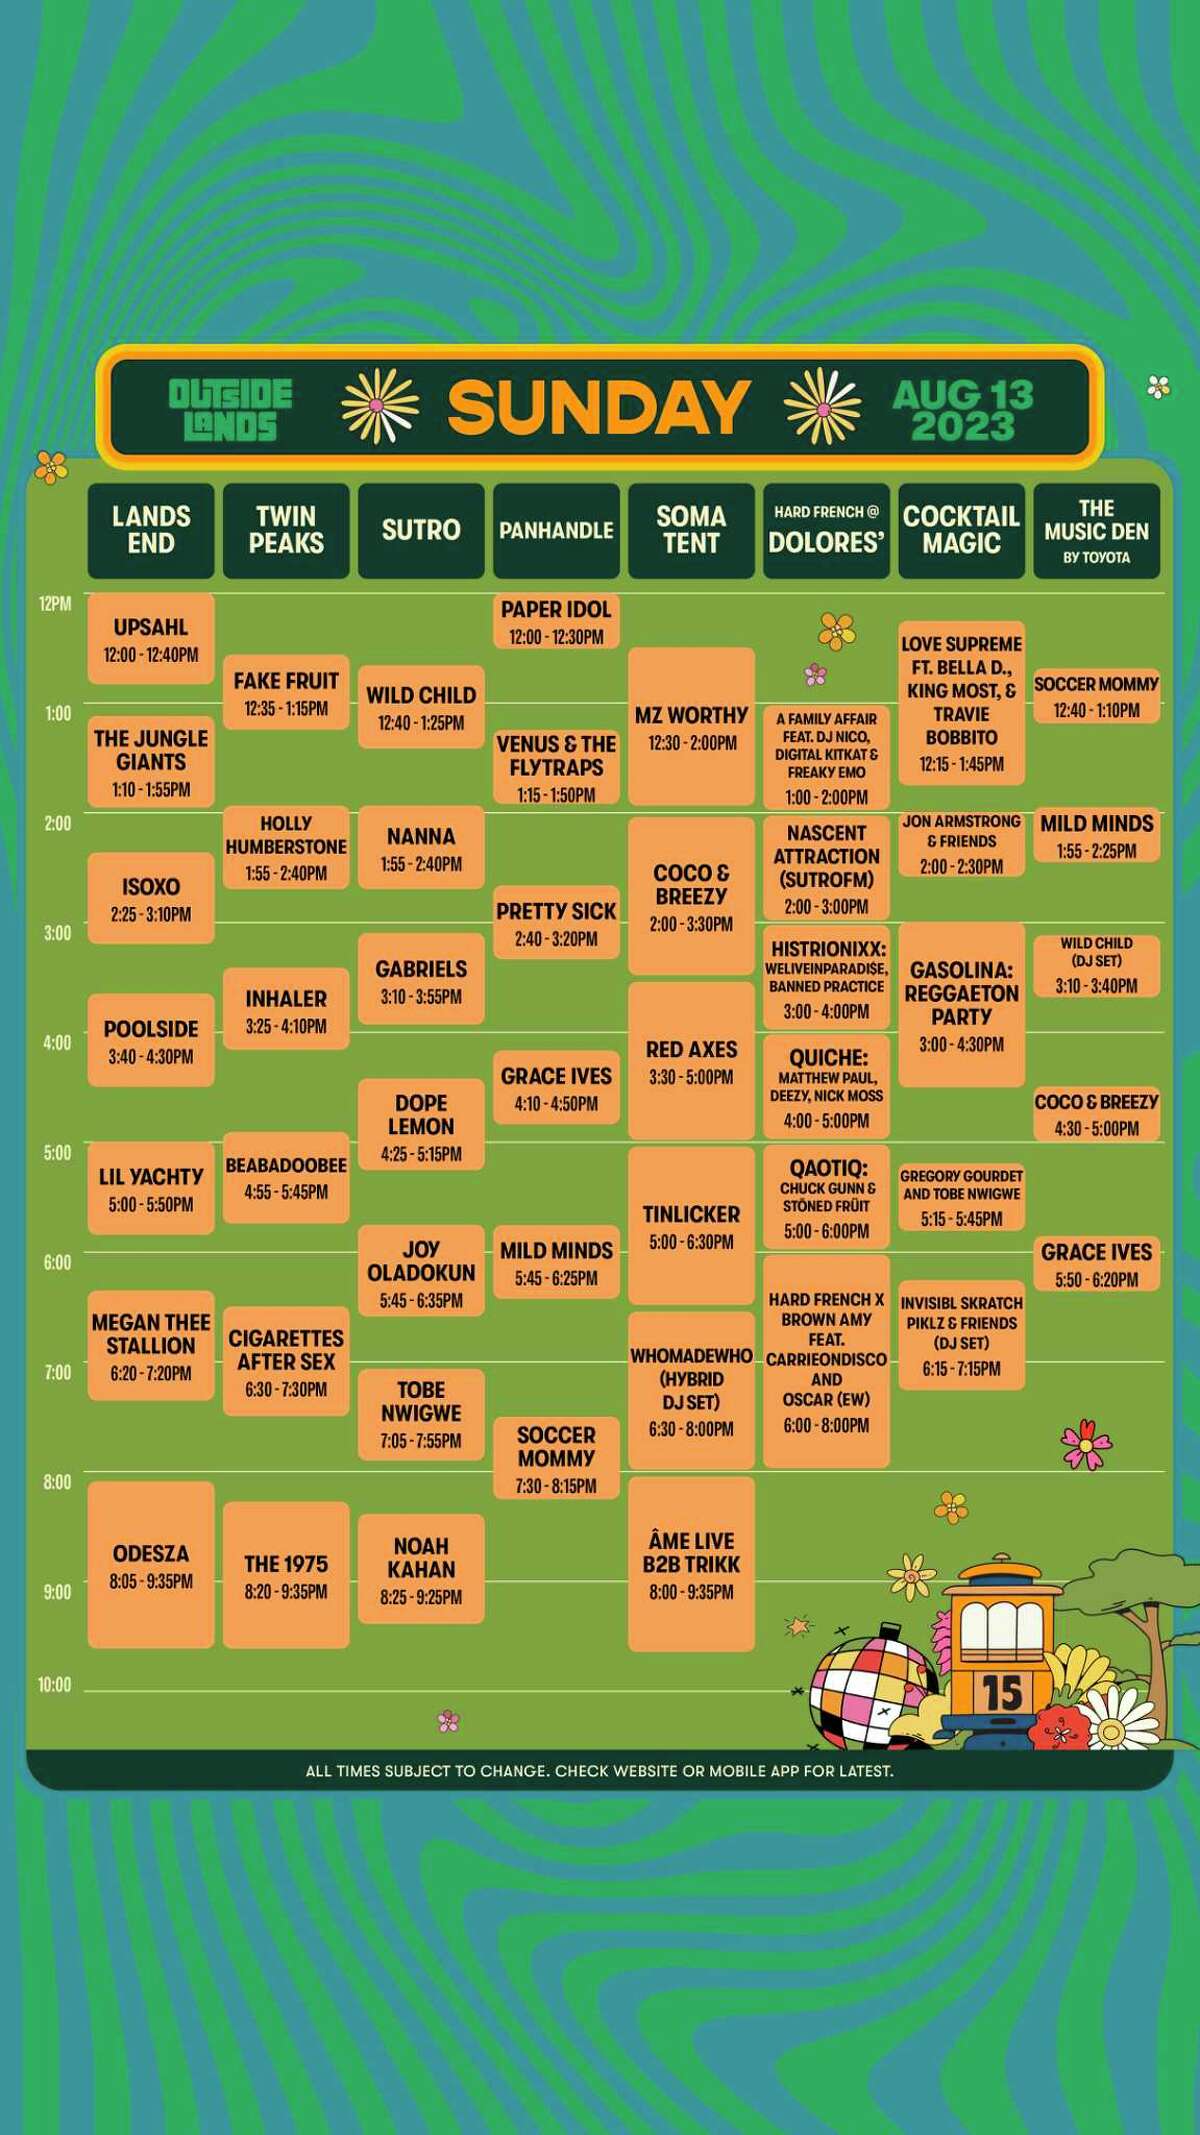 Outside Lands 2023 Lineup, set times, streaming details